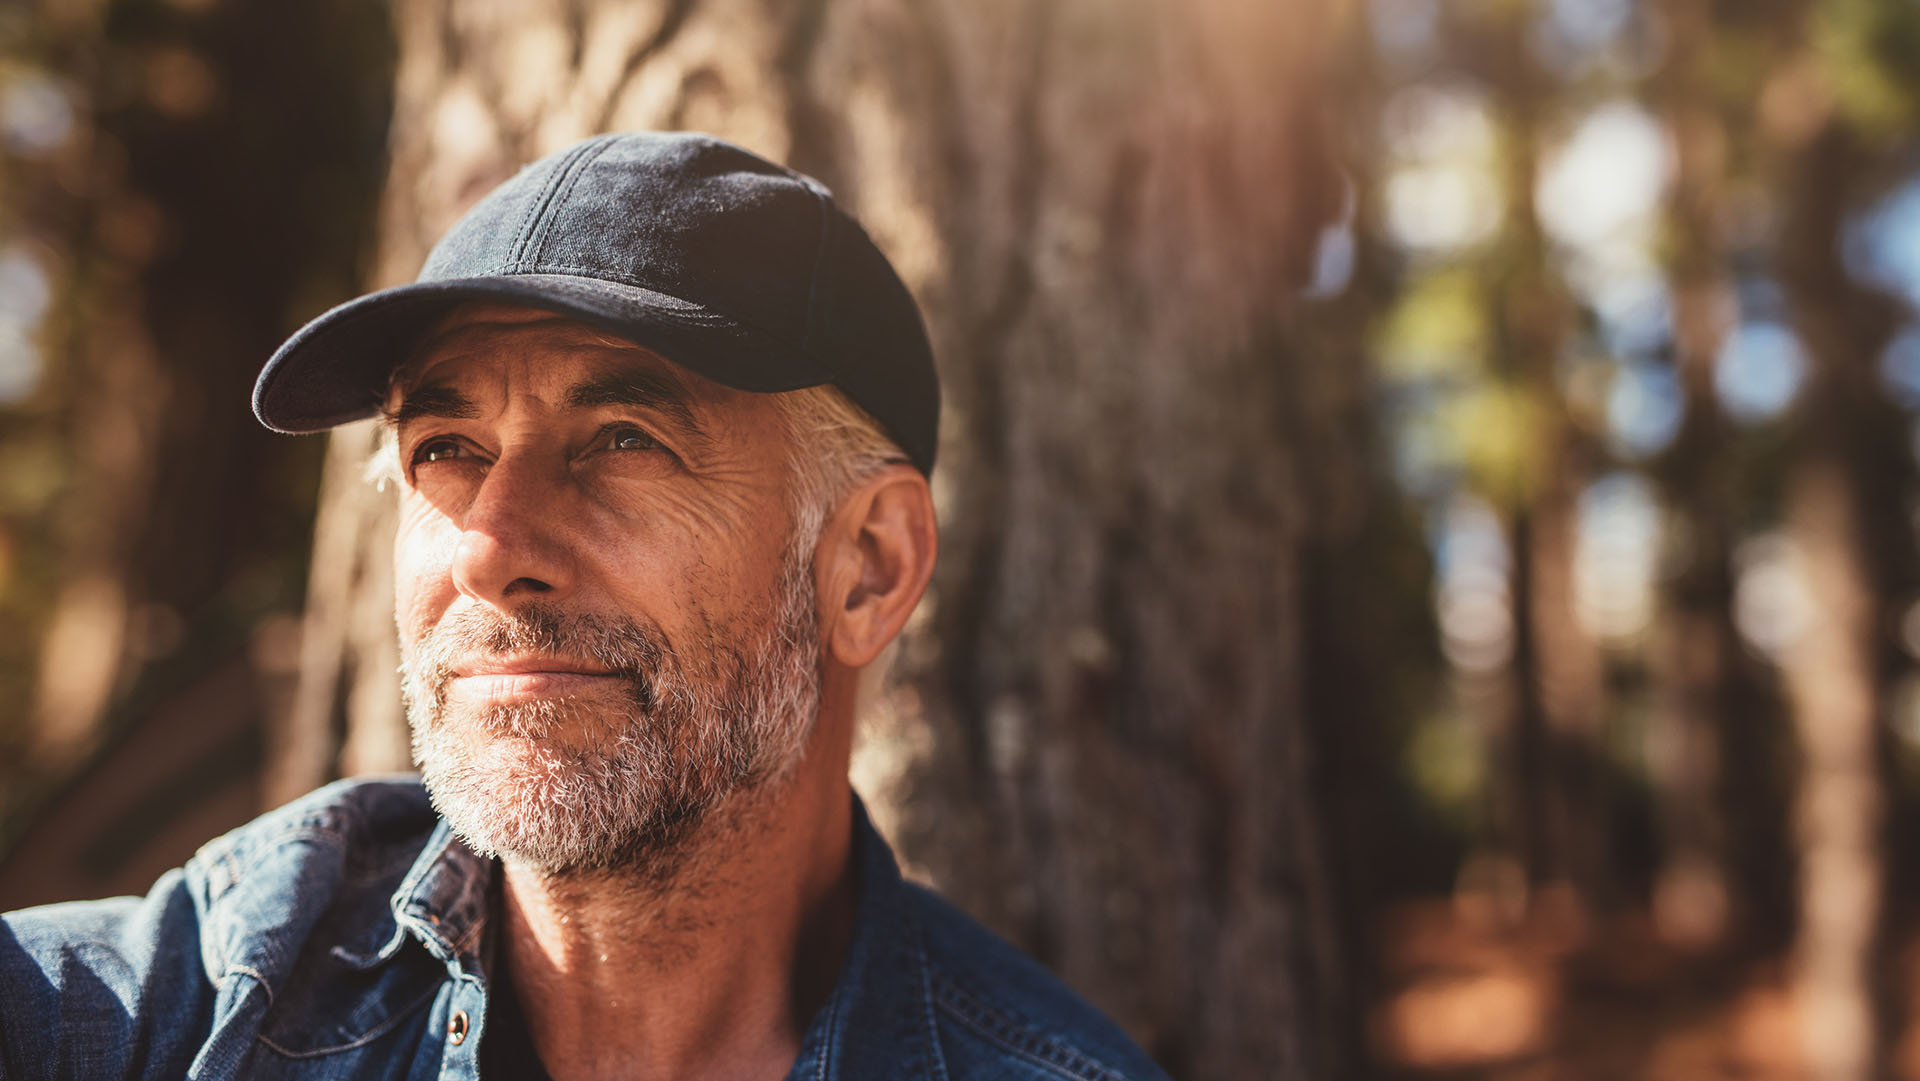 Close up portrait of senior man wearing cap looking away. Mature man with beard sitting in woods on a summer day.